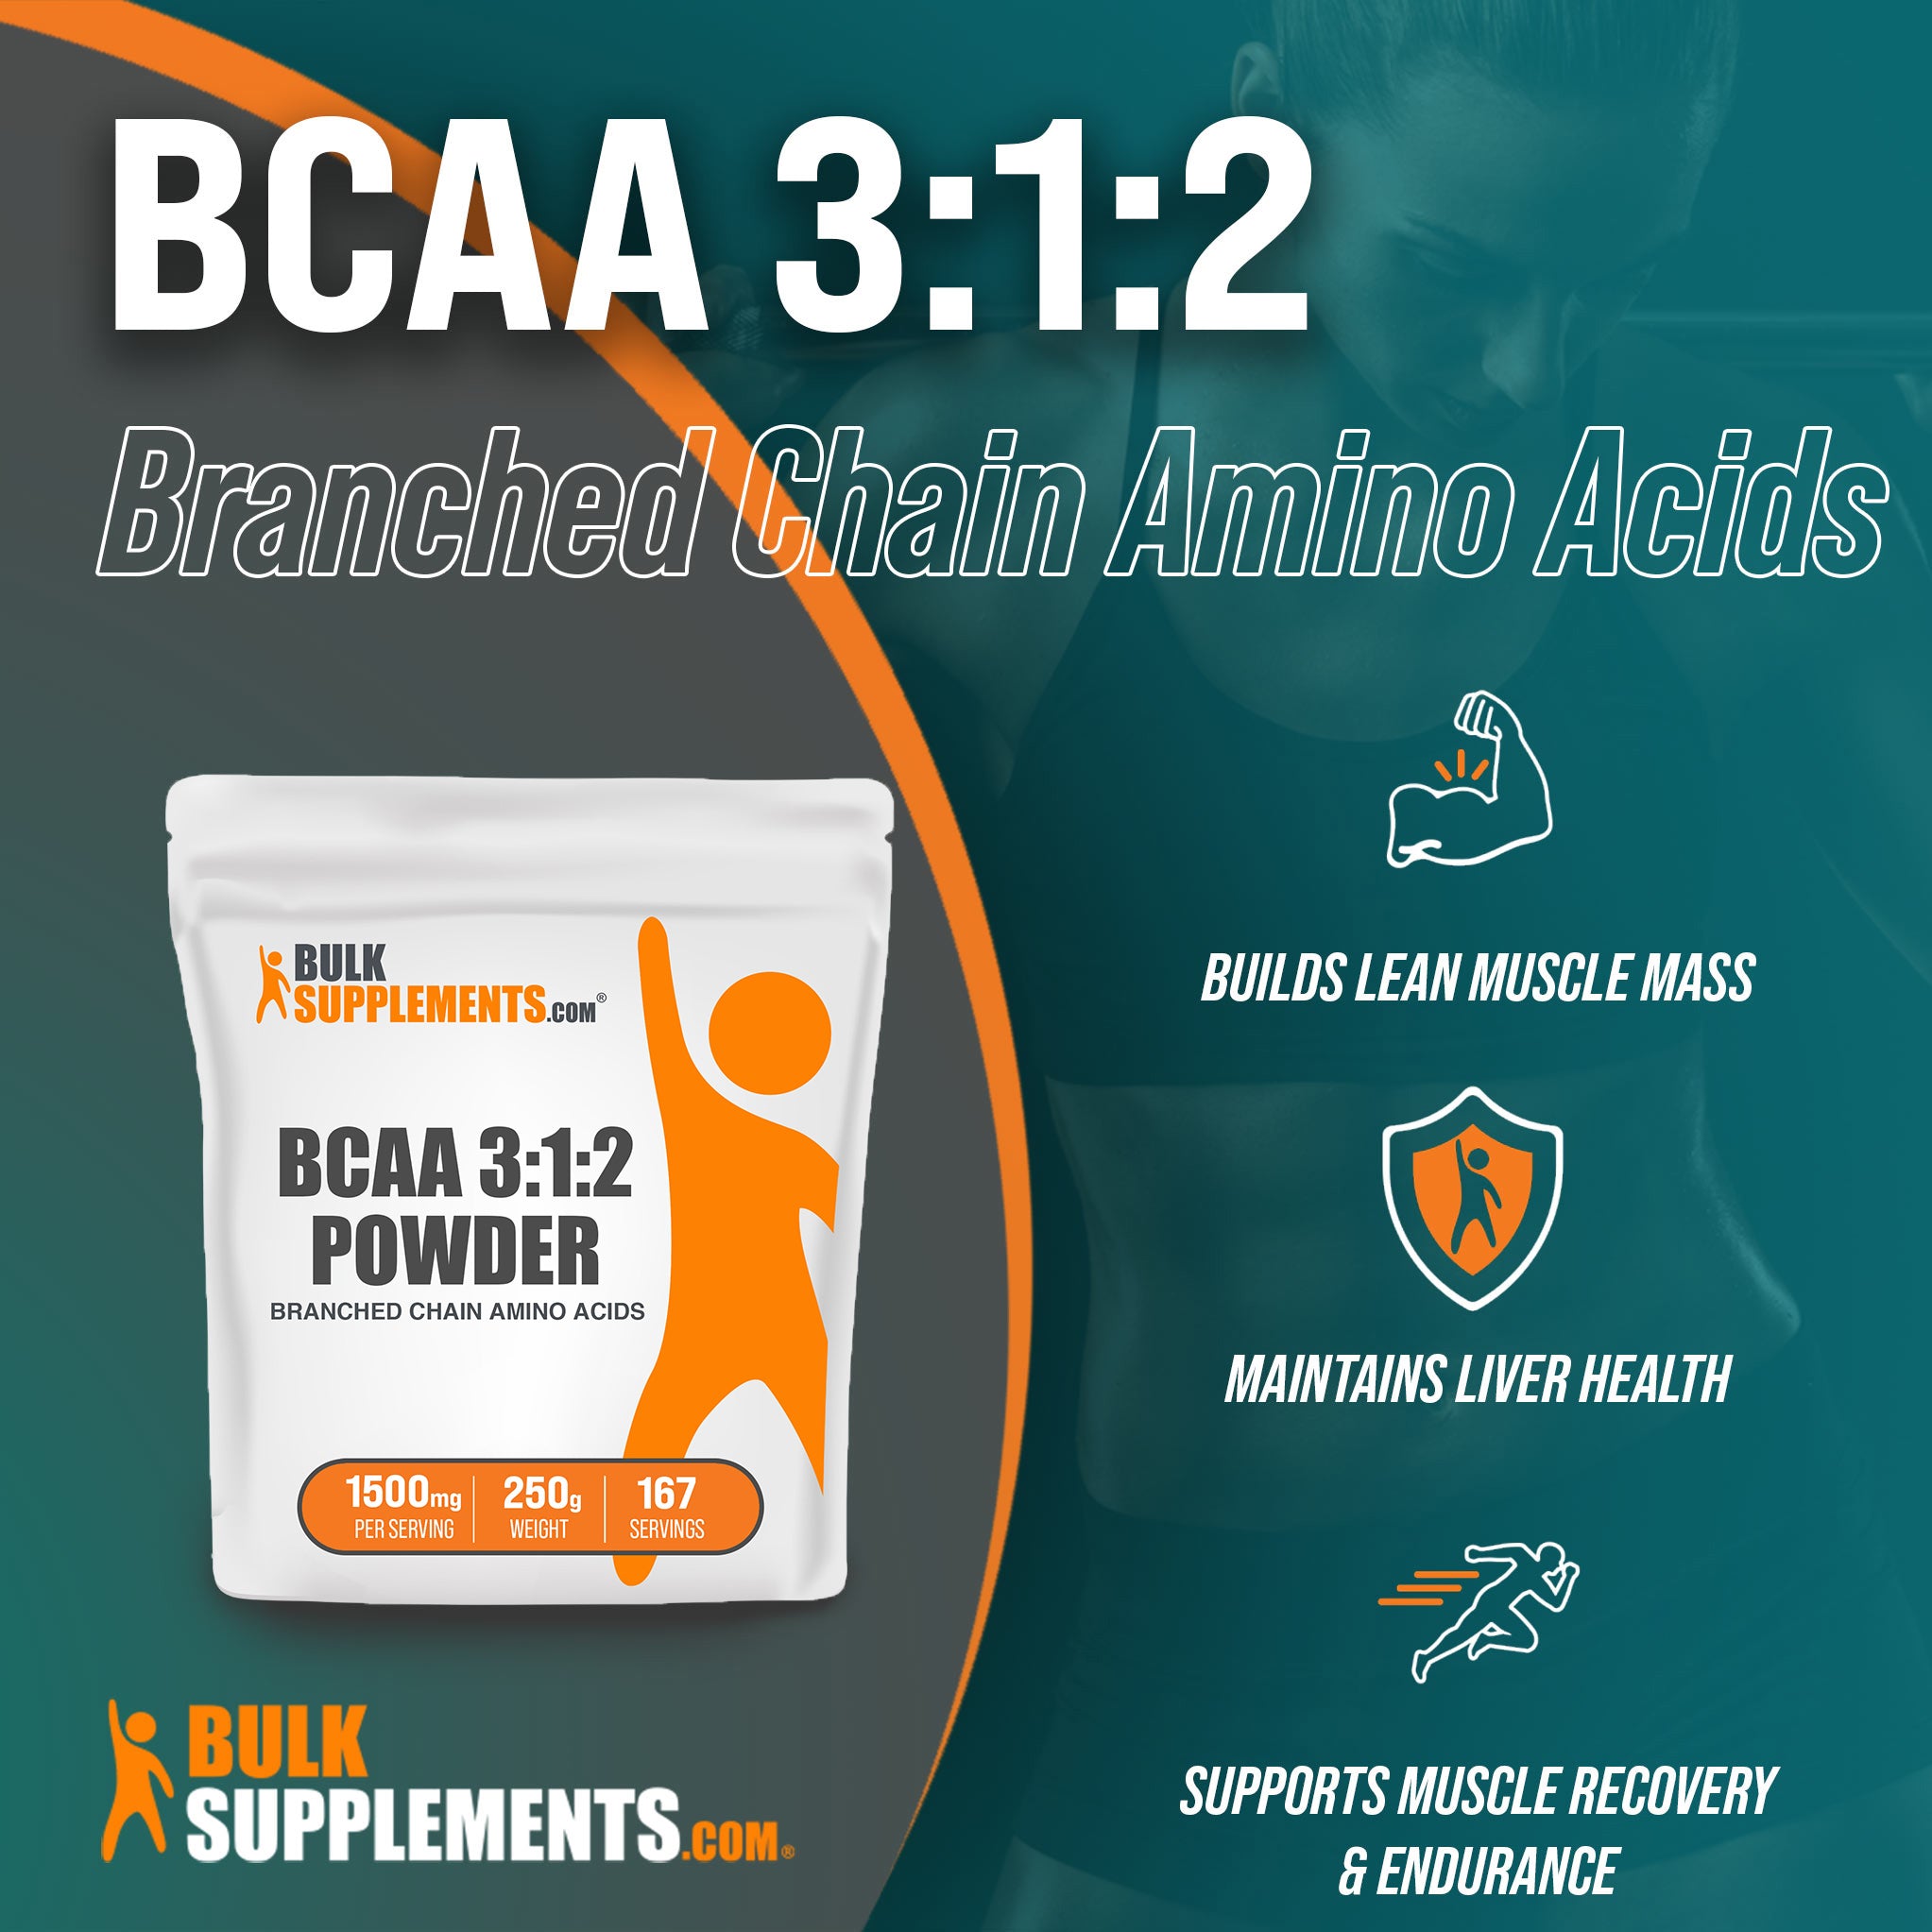 BCAA 312 Powder from Bulk Supplements to help build lean muscle mass 